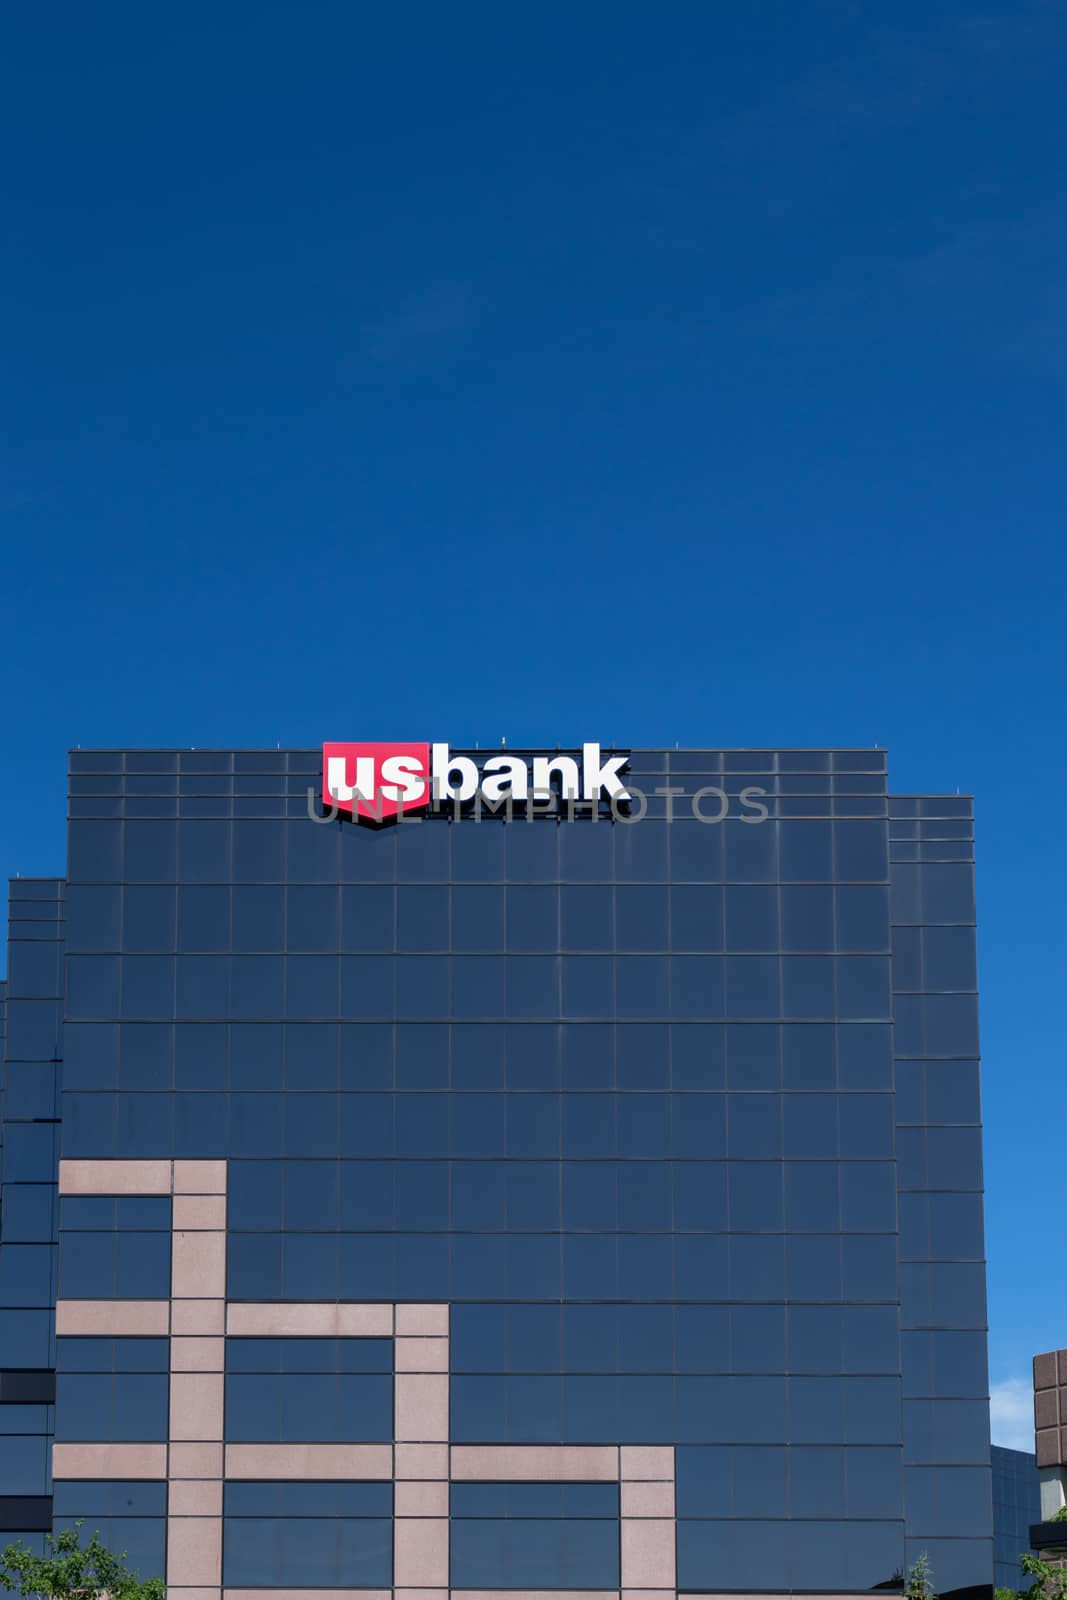 RICHFIELD, MN/USA - JUNE 21, 2014: US Bank headquarters building. U.S. Bancorp is an American diversified financial services holding company headquartered in Minneapolis, Minnesota.